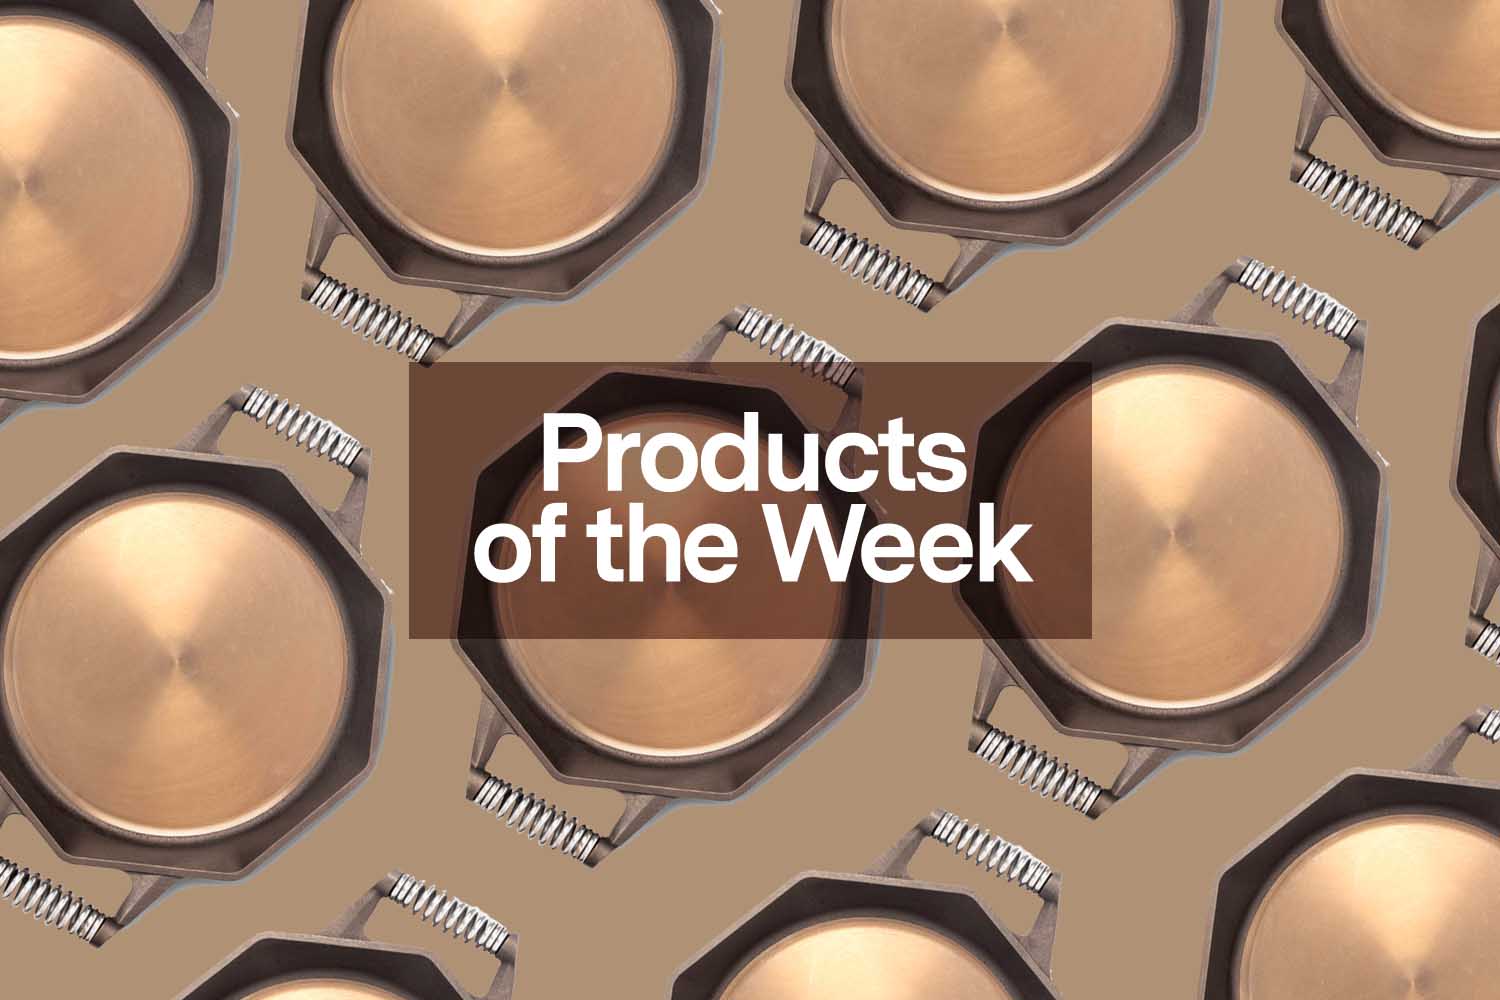 Products of the Week: Personal Popcorn Poppers, iPhone 13 Cases and 14-Inch Skillets